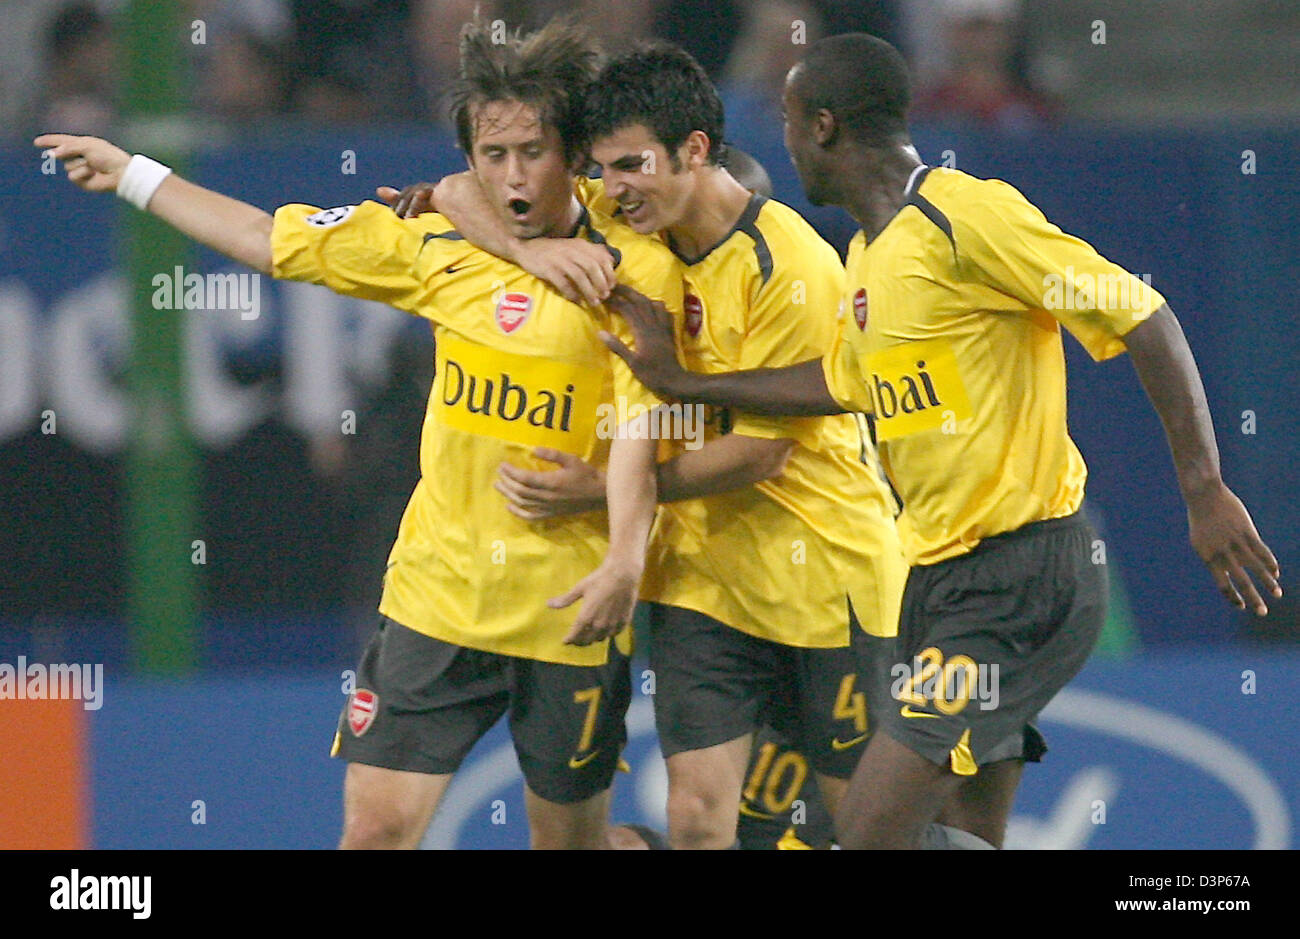 FC Arsenal London players (L-R) Tomas Rosicky, Cesc Fabregas and Johan Djourou celebrate after Rosicky's 2:0 goal in the UEFA Champions League match at the AOL-Arena in Hamburg, Germany, Wednesday, 13 September 2006. Arsenal won 2-1 against Hamburger SV taking three points. Photo: Maurizio Gambarini Stock Photo